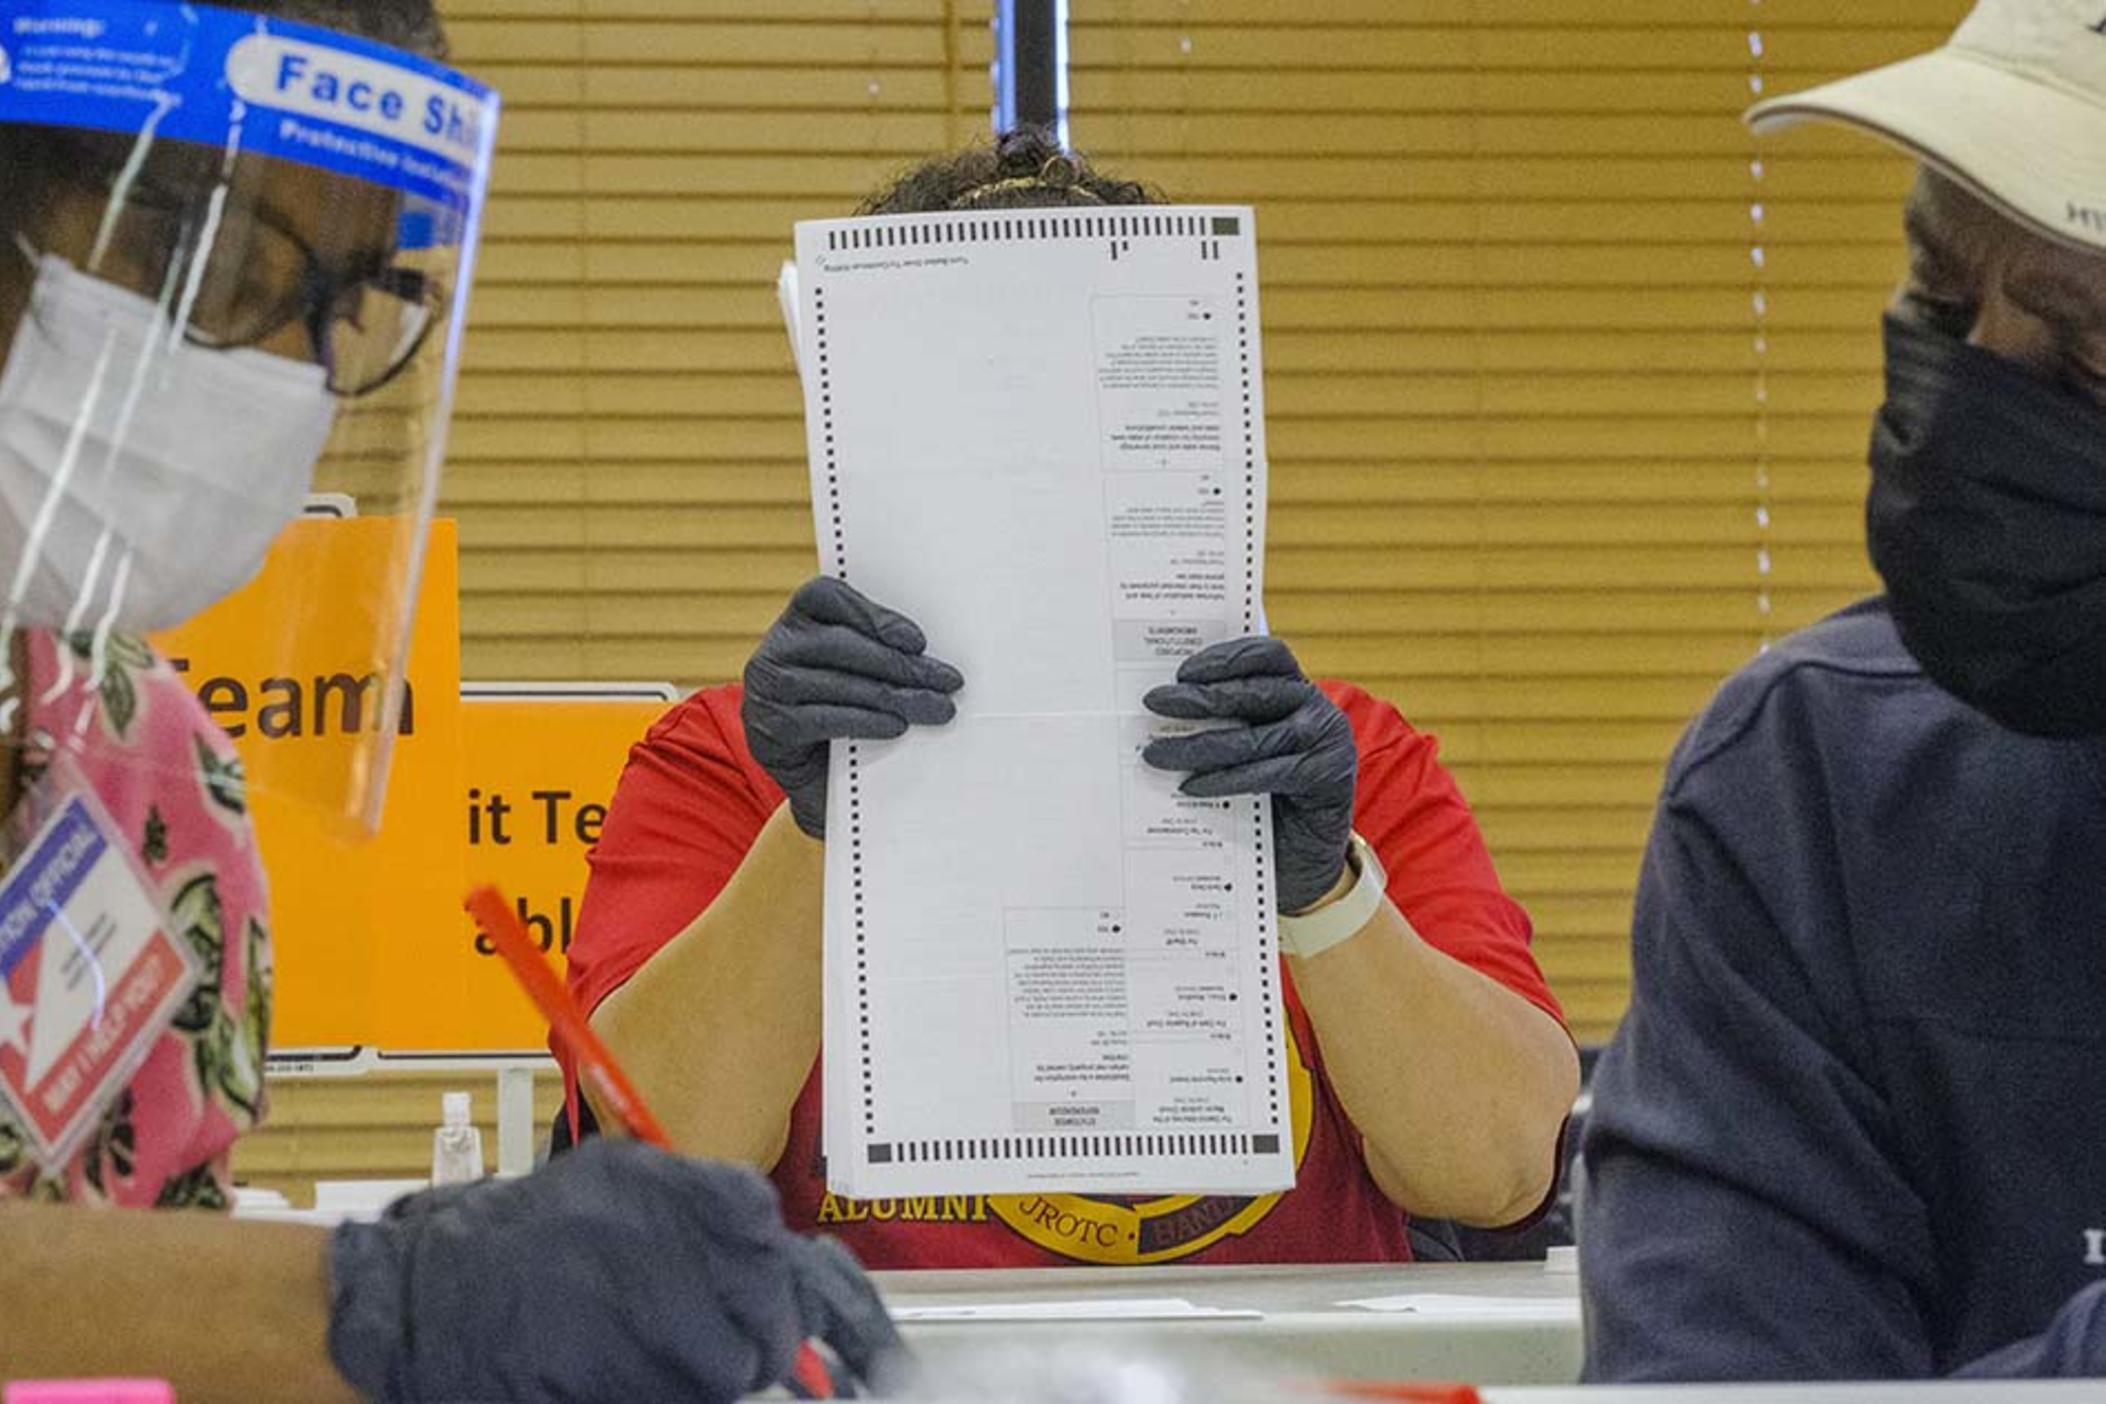 14 auditors split into seven teams of two began the manual recount of around 71,000 presidential ballots in Macon, Ga., Friday, part of the recount of about 5 million votes cast statewide that must end by midnight on Wednesday, November 18. 